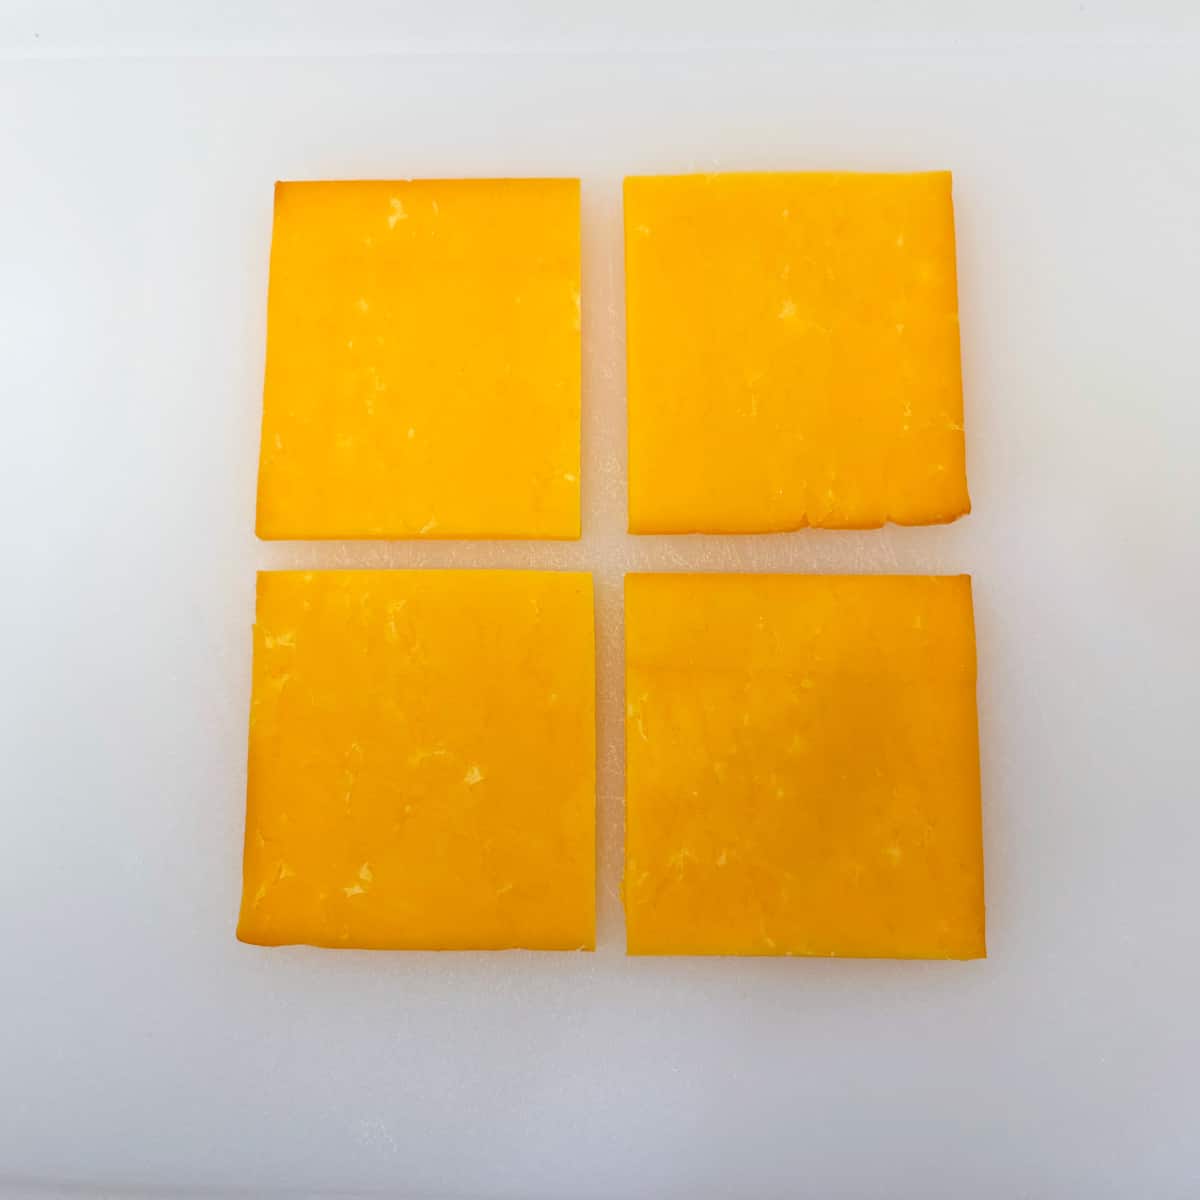 A slice of cheese on a cutting board, cut into four squares.